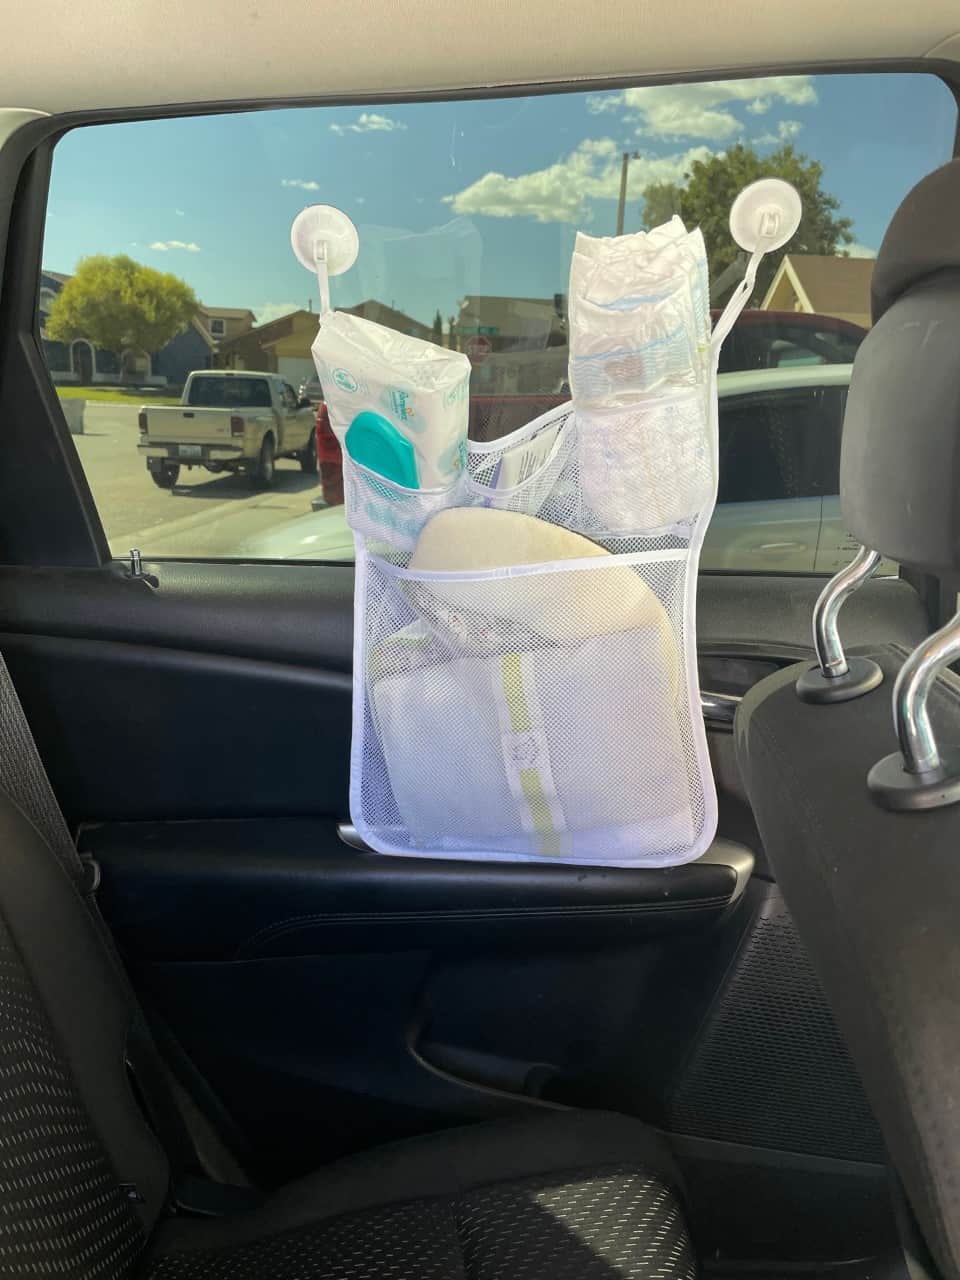 mesh bath toy organizer on inside car window, with baby wipes, changing pad, diapers and ointment